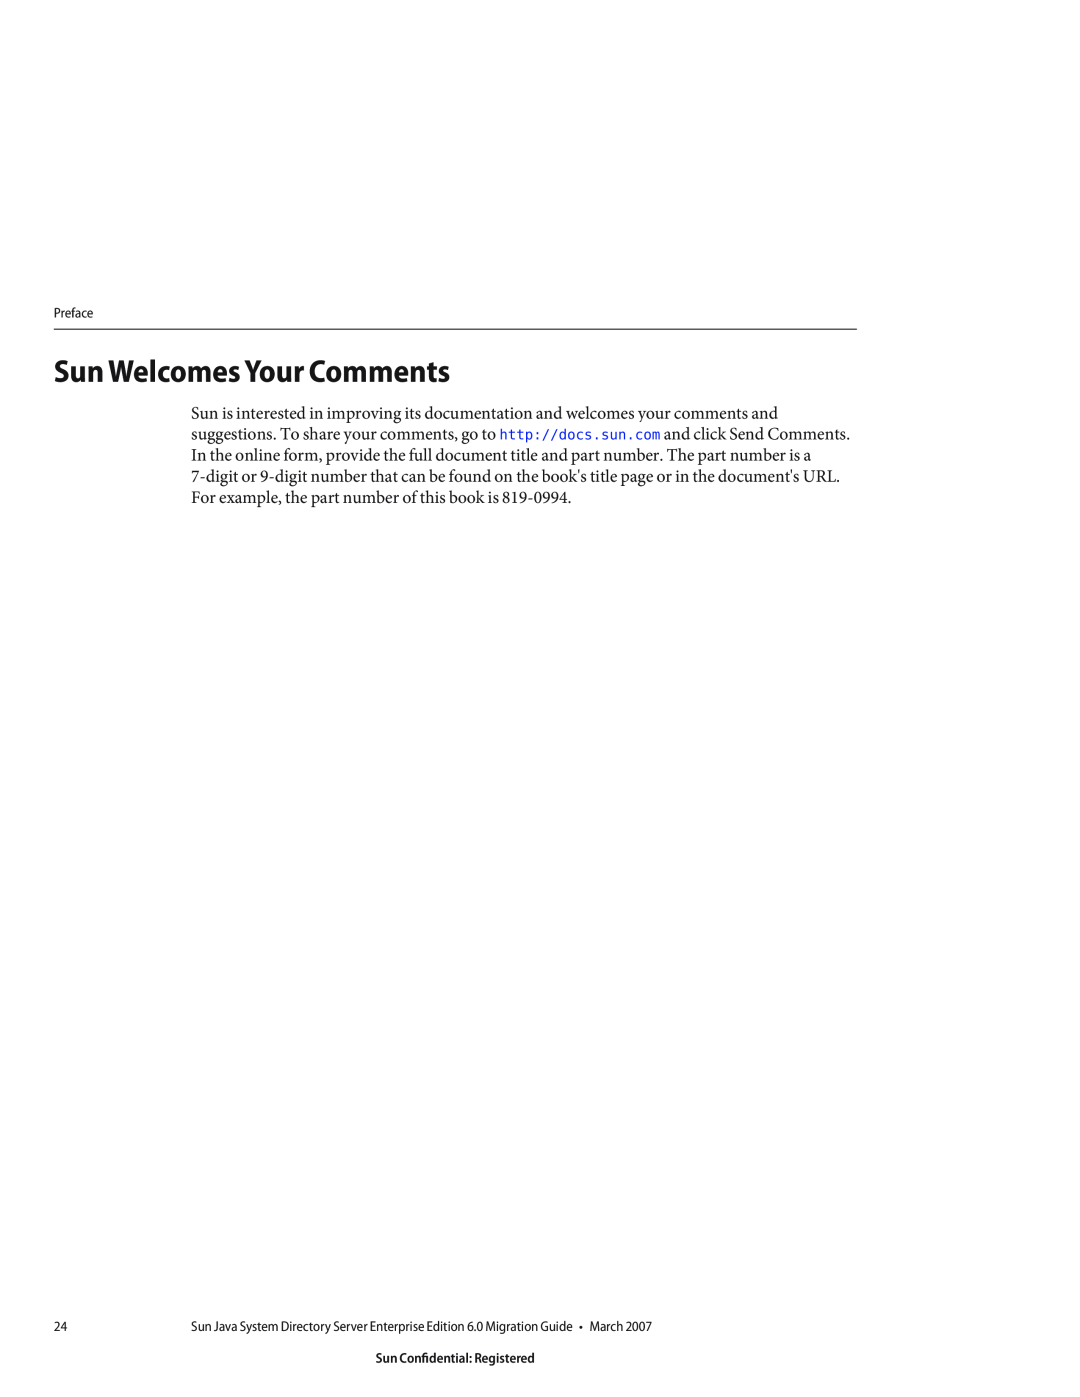 Sun Microsystems 8190994 manual Sun Welcomes Your Comments 